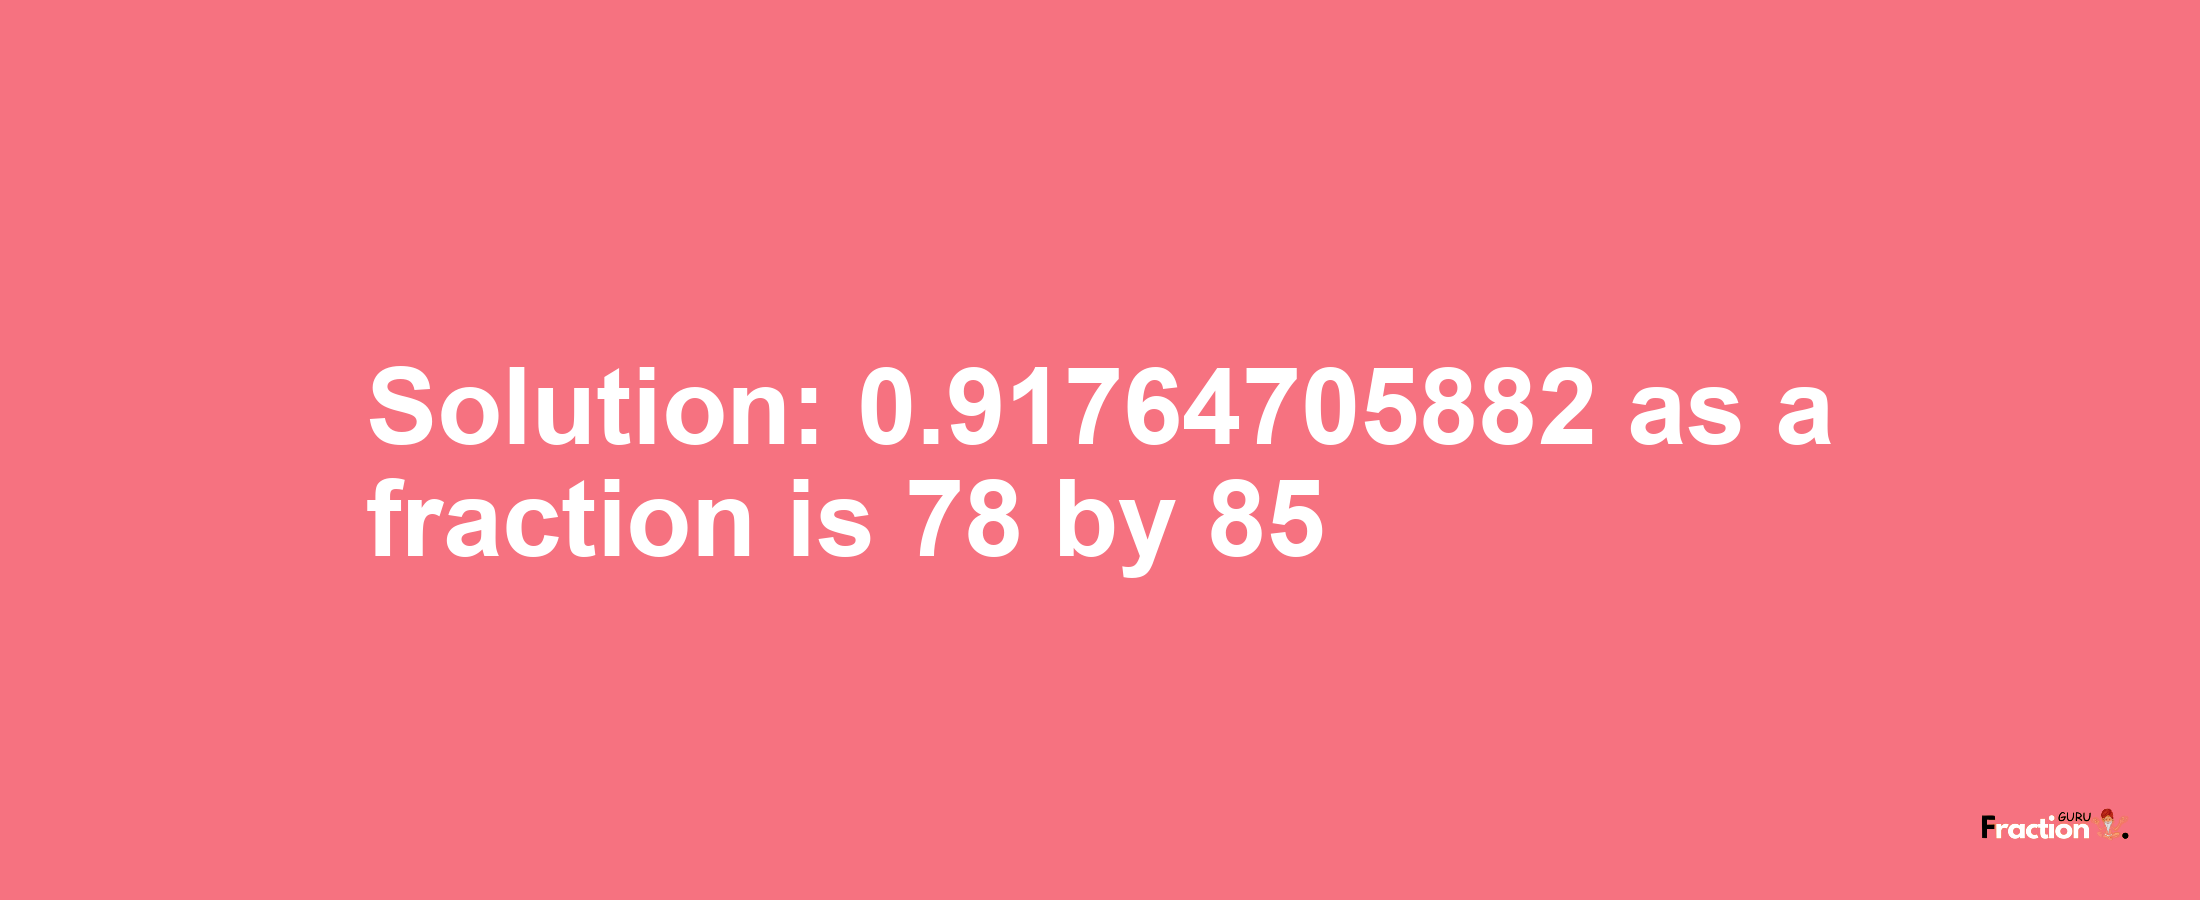 Solution:0.91764705882 as a fraction is 78/85